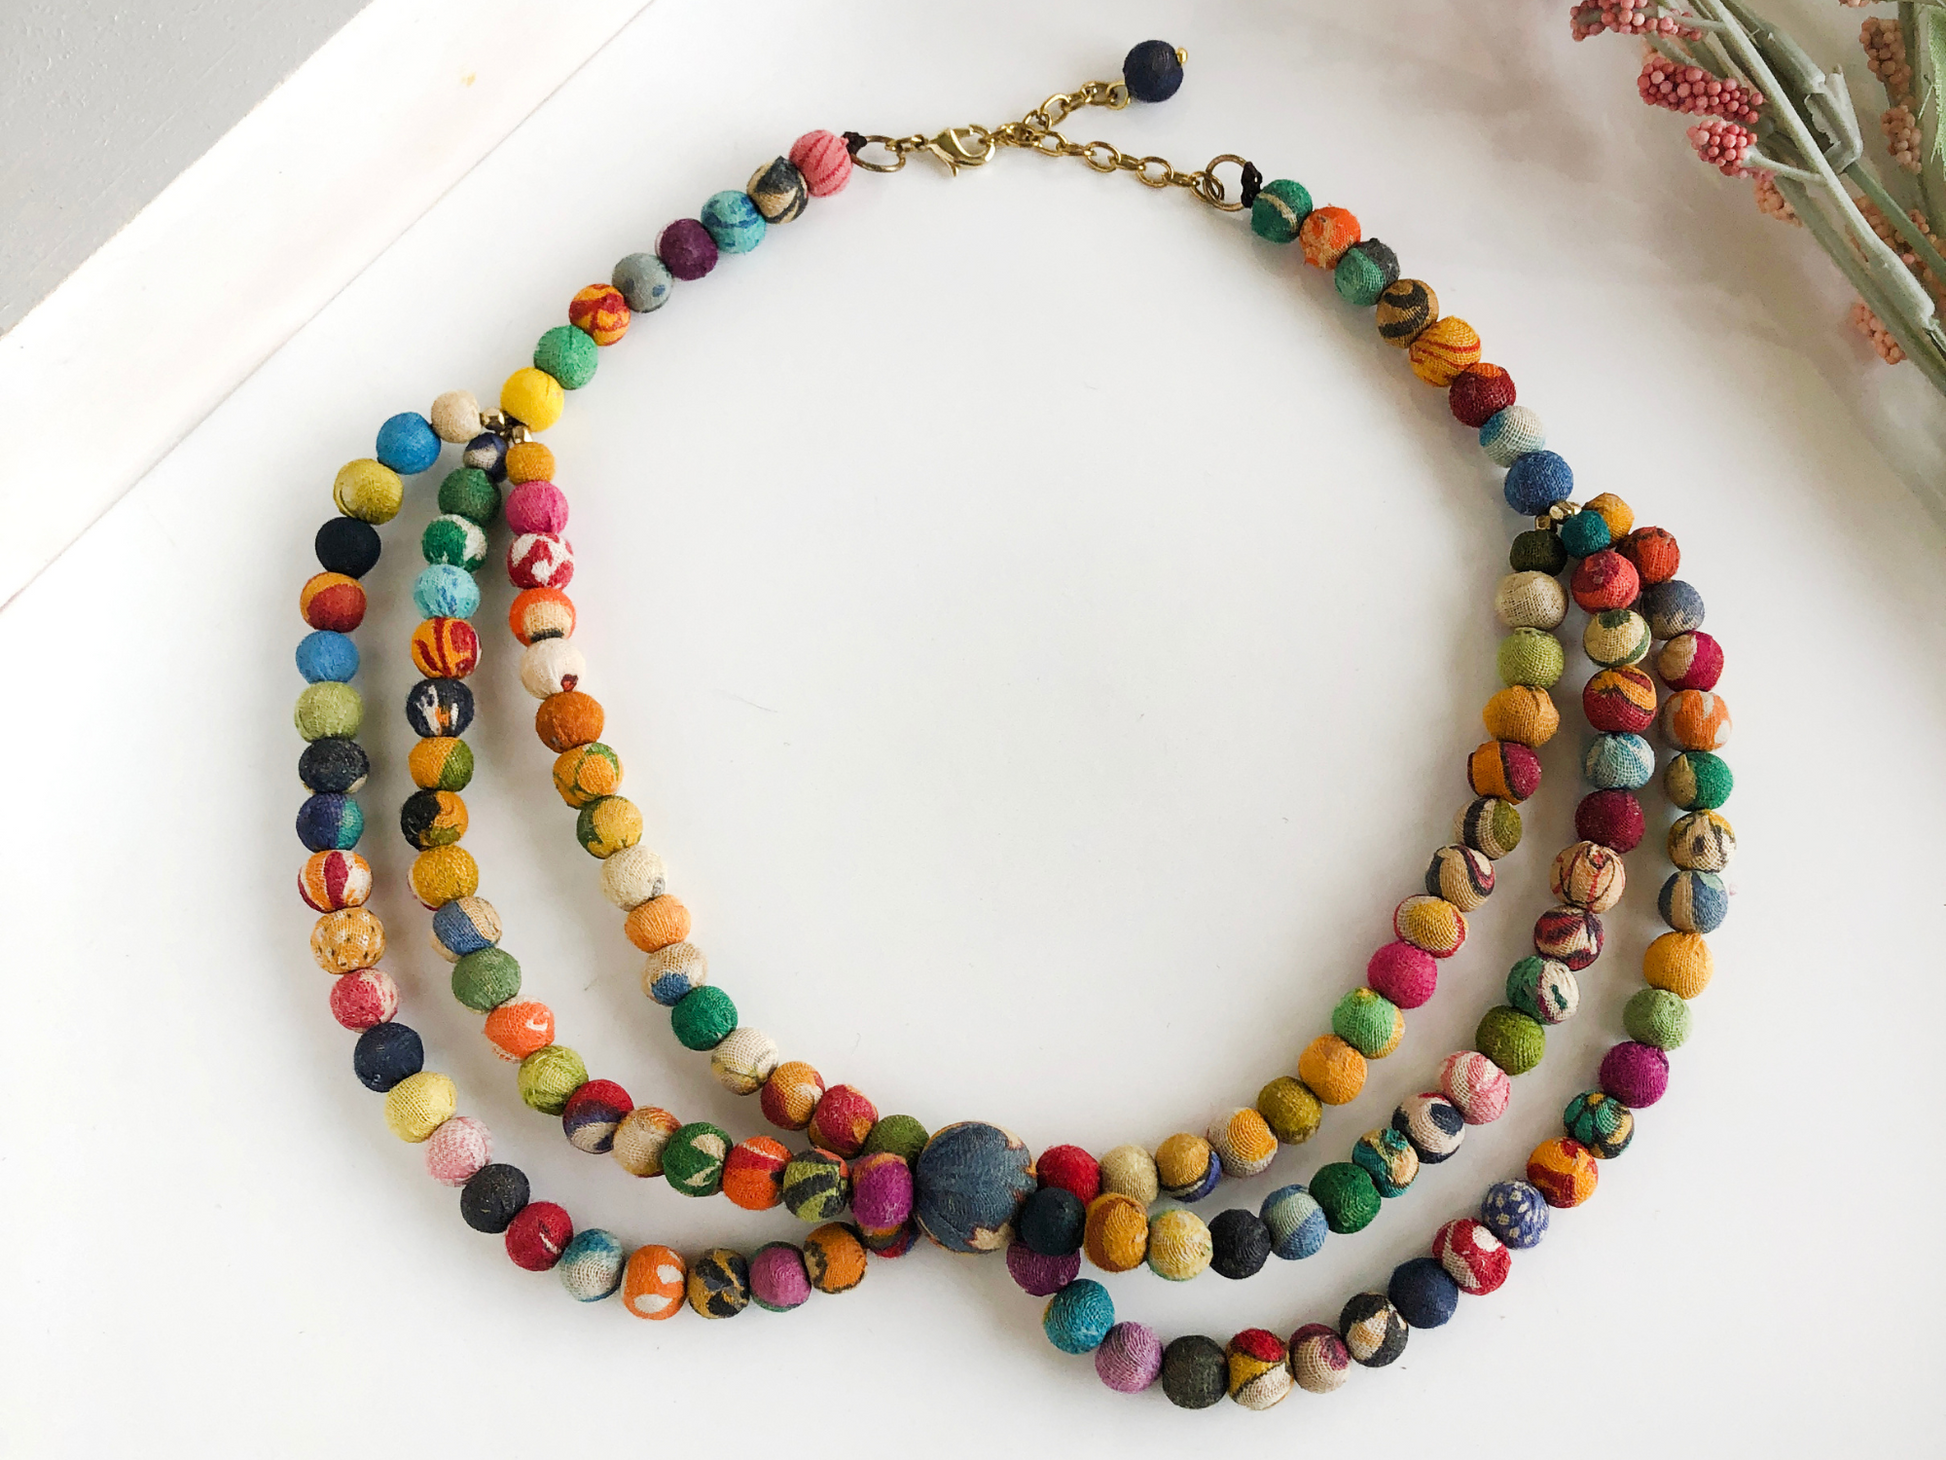 Vintage Kantha Poetry Necklace - KanthaCollection